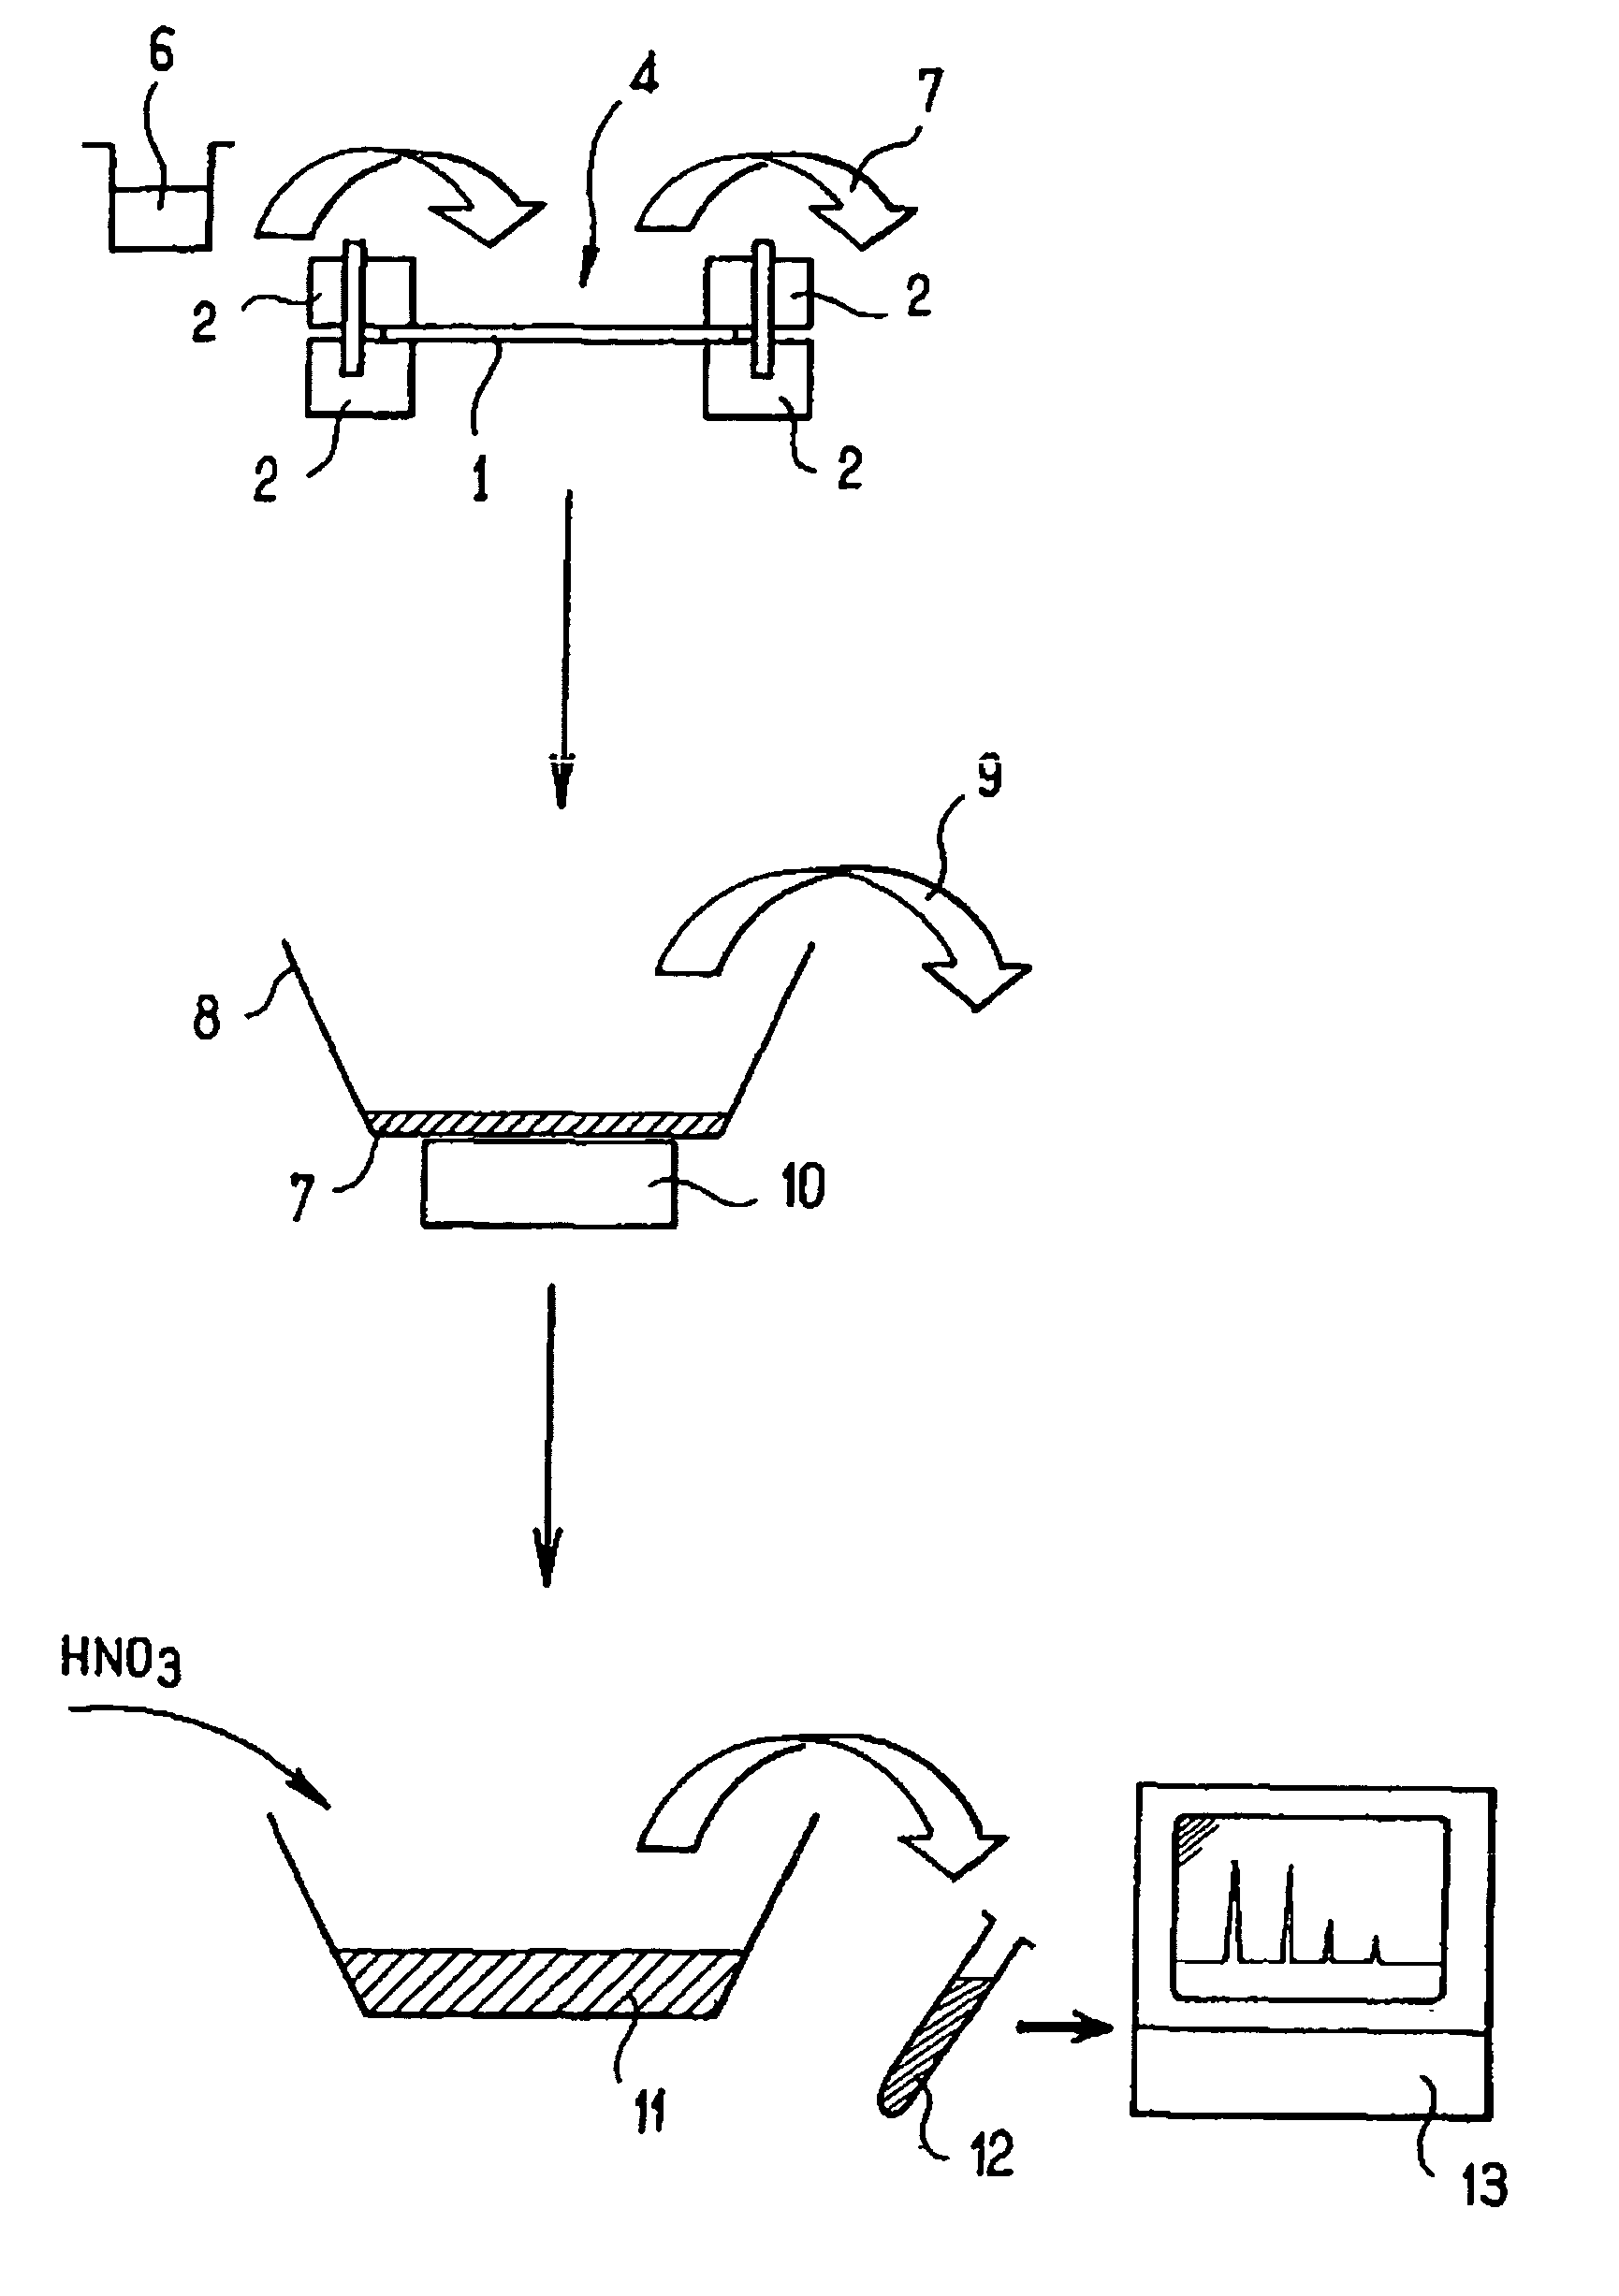 Method for assaying elements in a substrate for optics, electronics, or optoelectronics